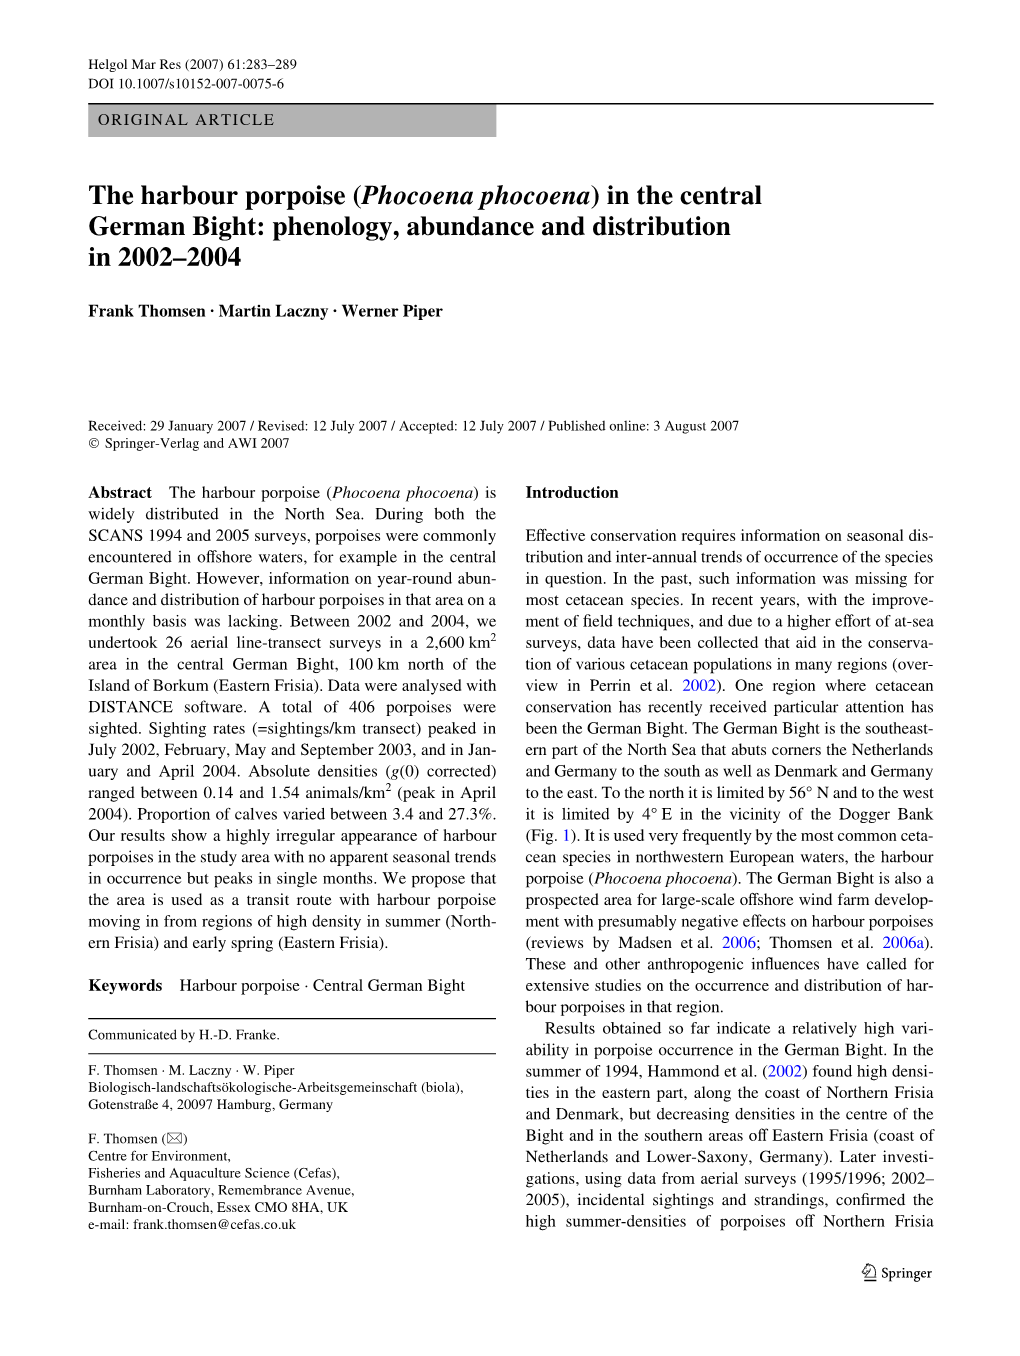 The Harbour Porpoise (Phocoena Phocoena) in the Central German Bight: Phenology, Abundance and Distribution in 2002–2004